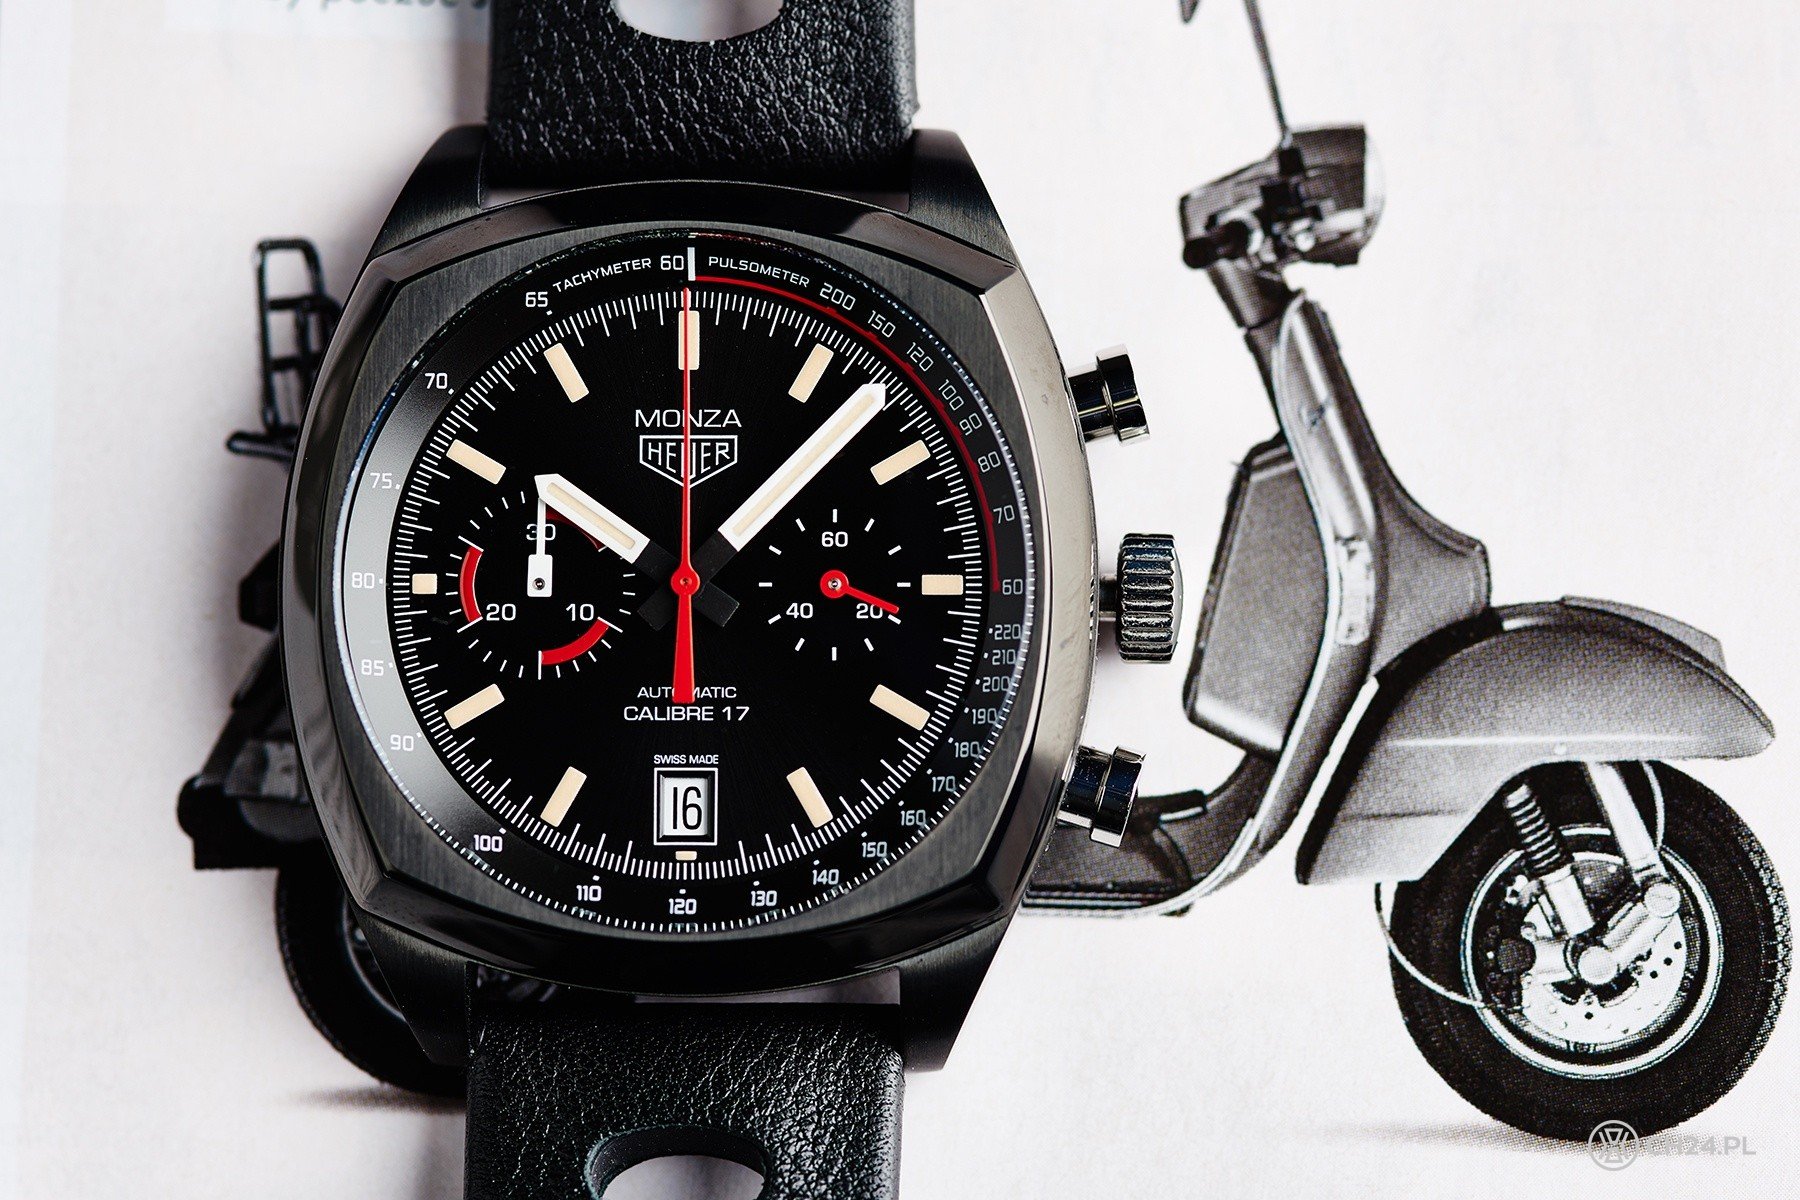 Tag Heuer Monza flyback - full CARBON look #watches #tagheuerwatch  #tagheuerwatches - YouTube